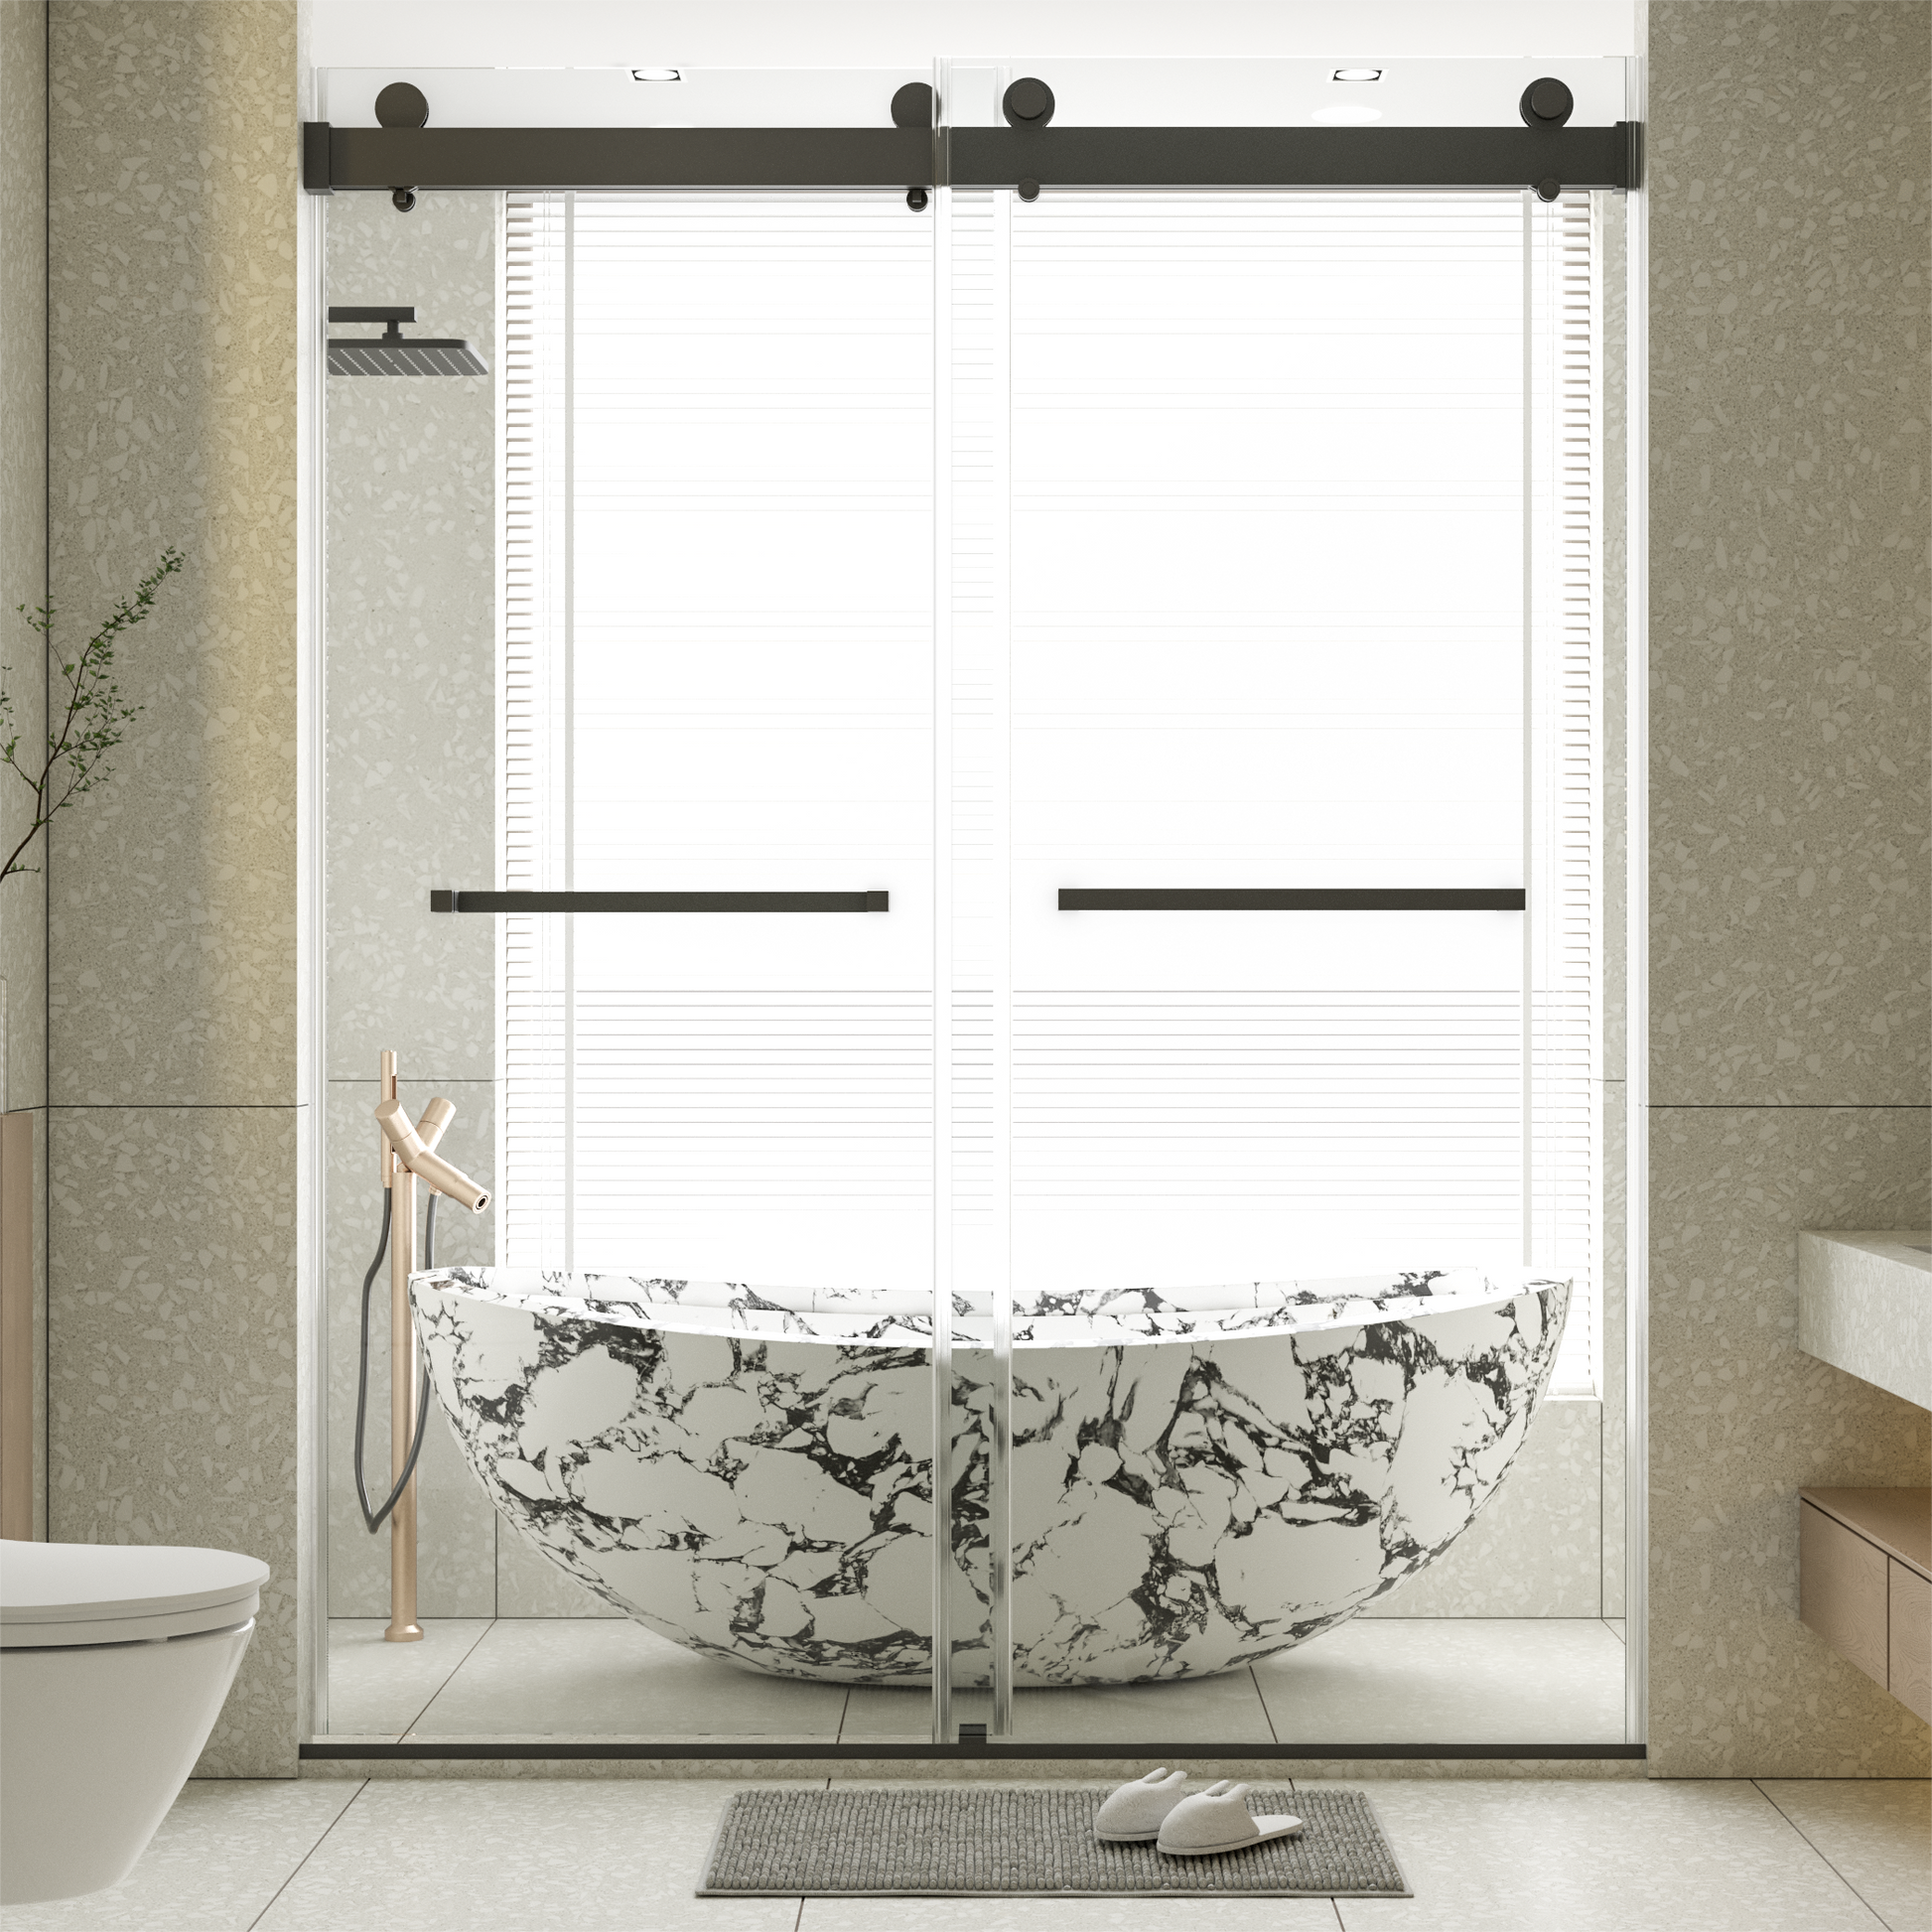 56 60 inches W *76 inches H Frameless Double Sliding black-glass+metal